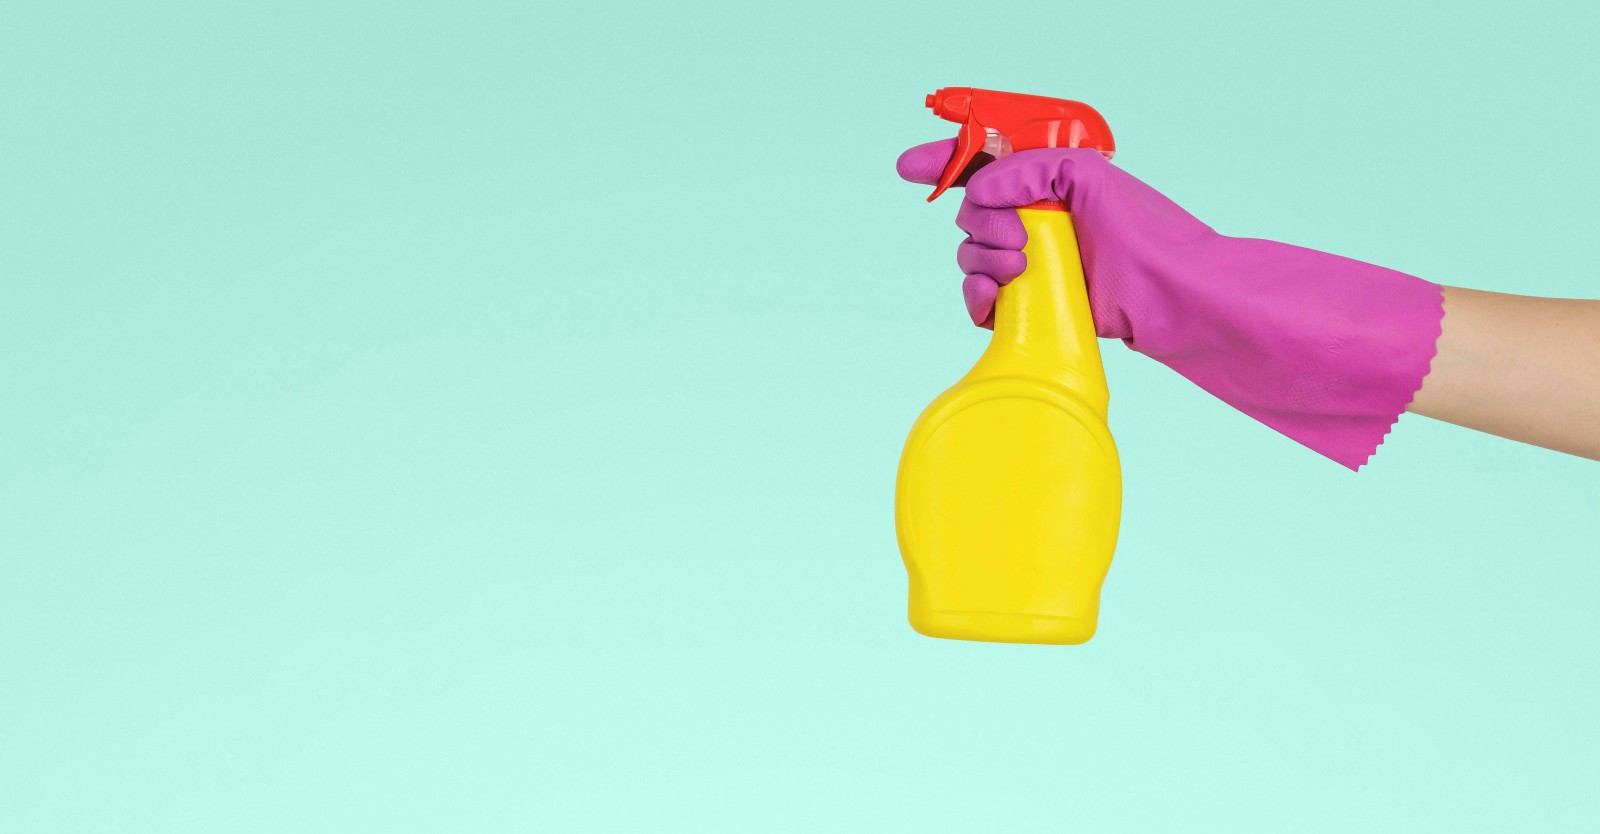 A pink rubber gloved hand and some yellow cleaning spray